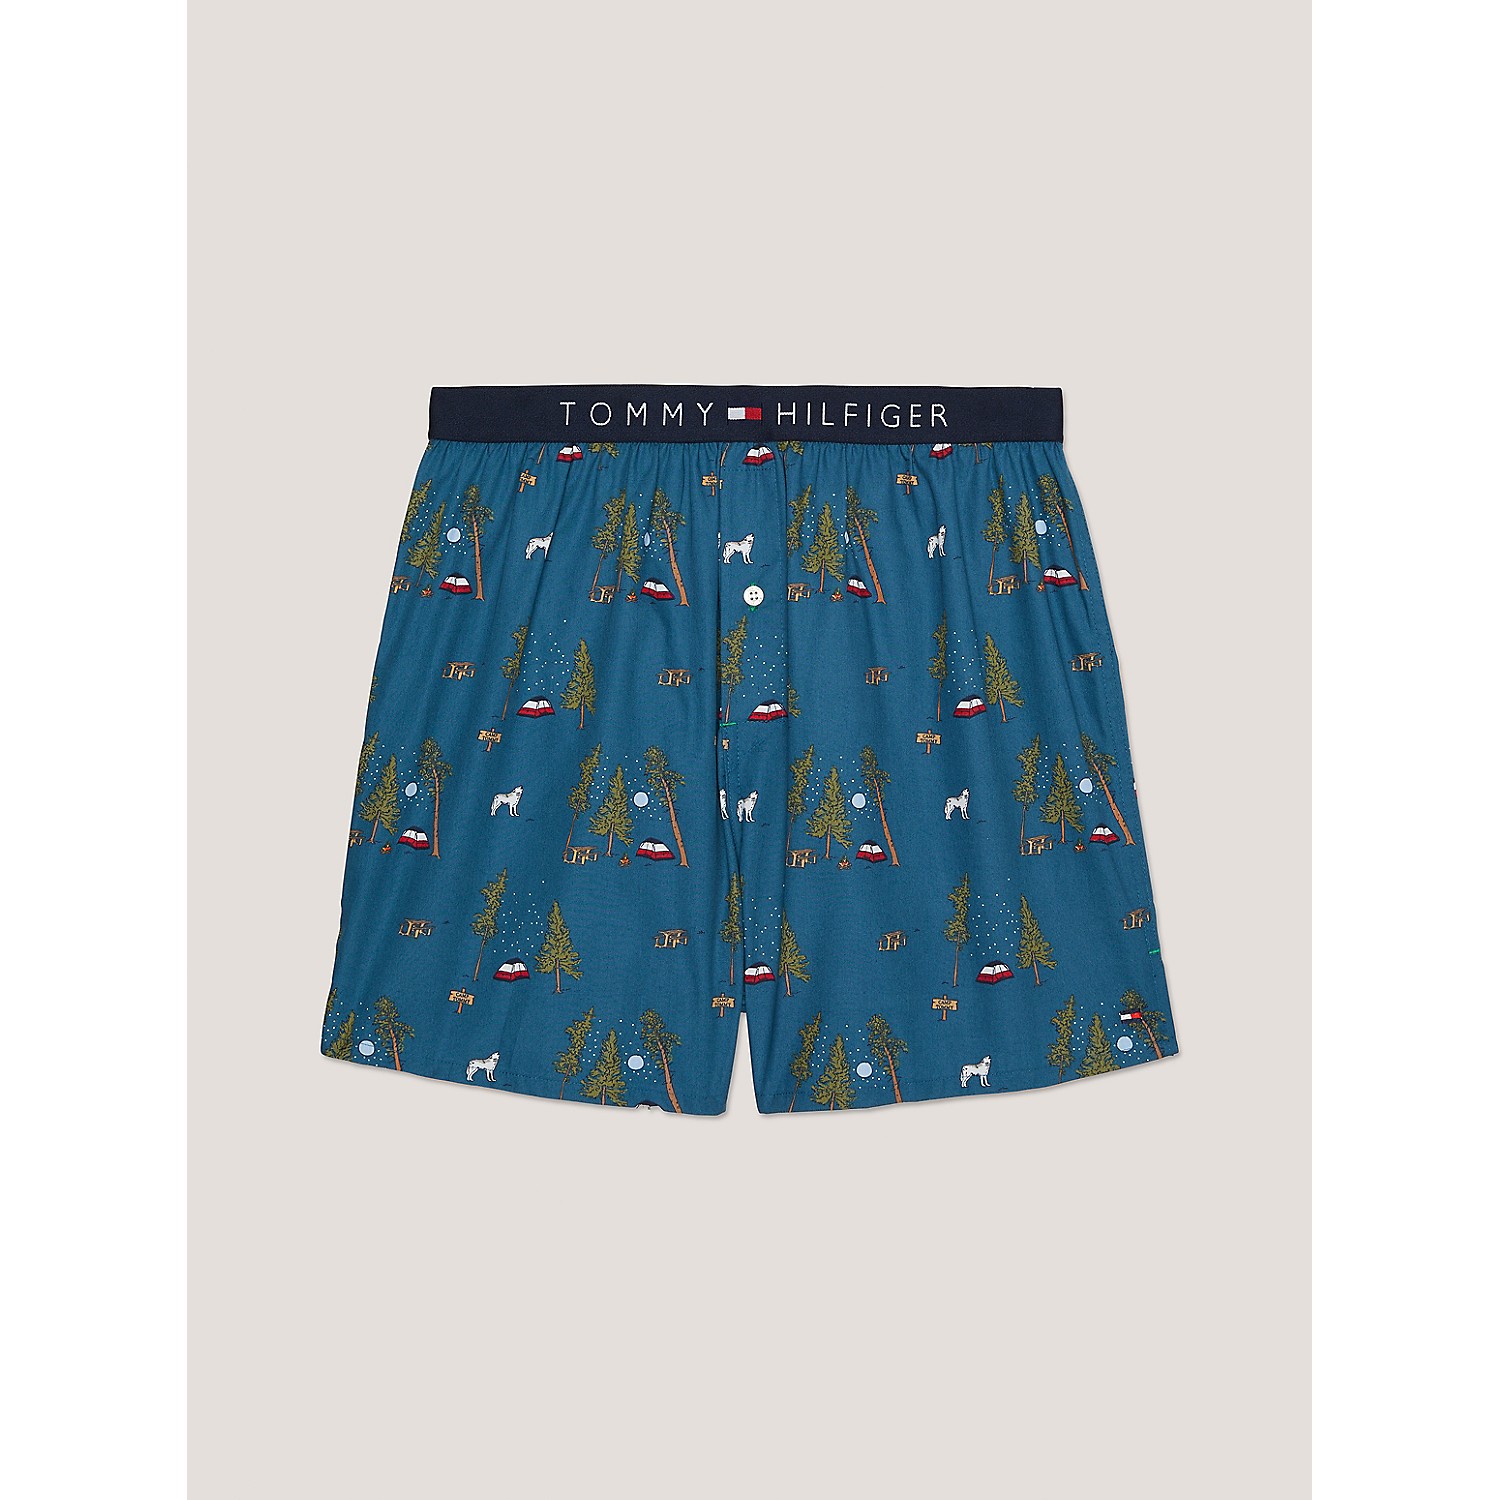 TOMMY HILFIGER Regular Fit Fashion Woven Boxer